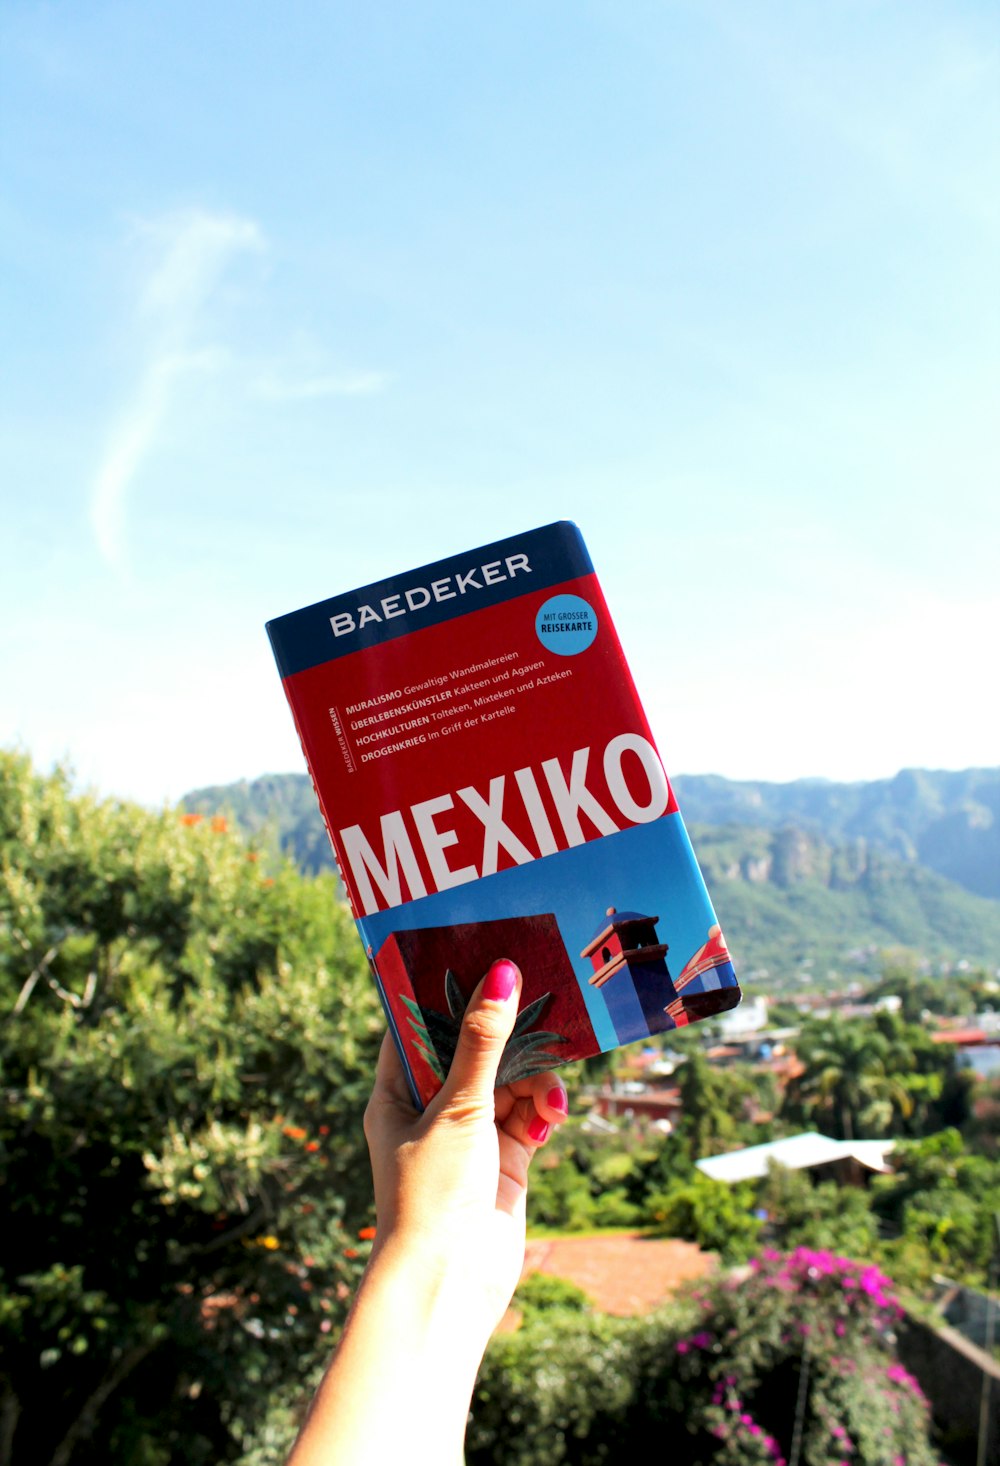 person holding up Mexiko book